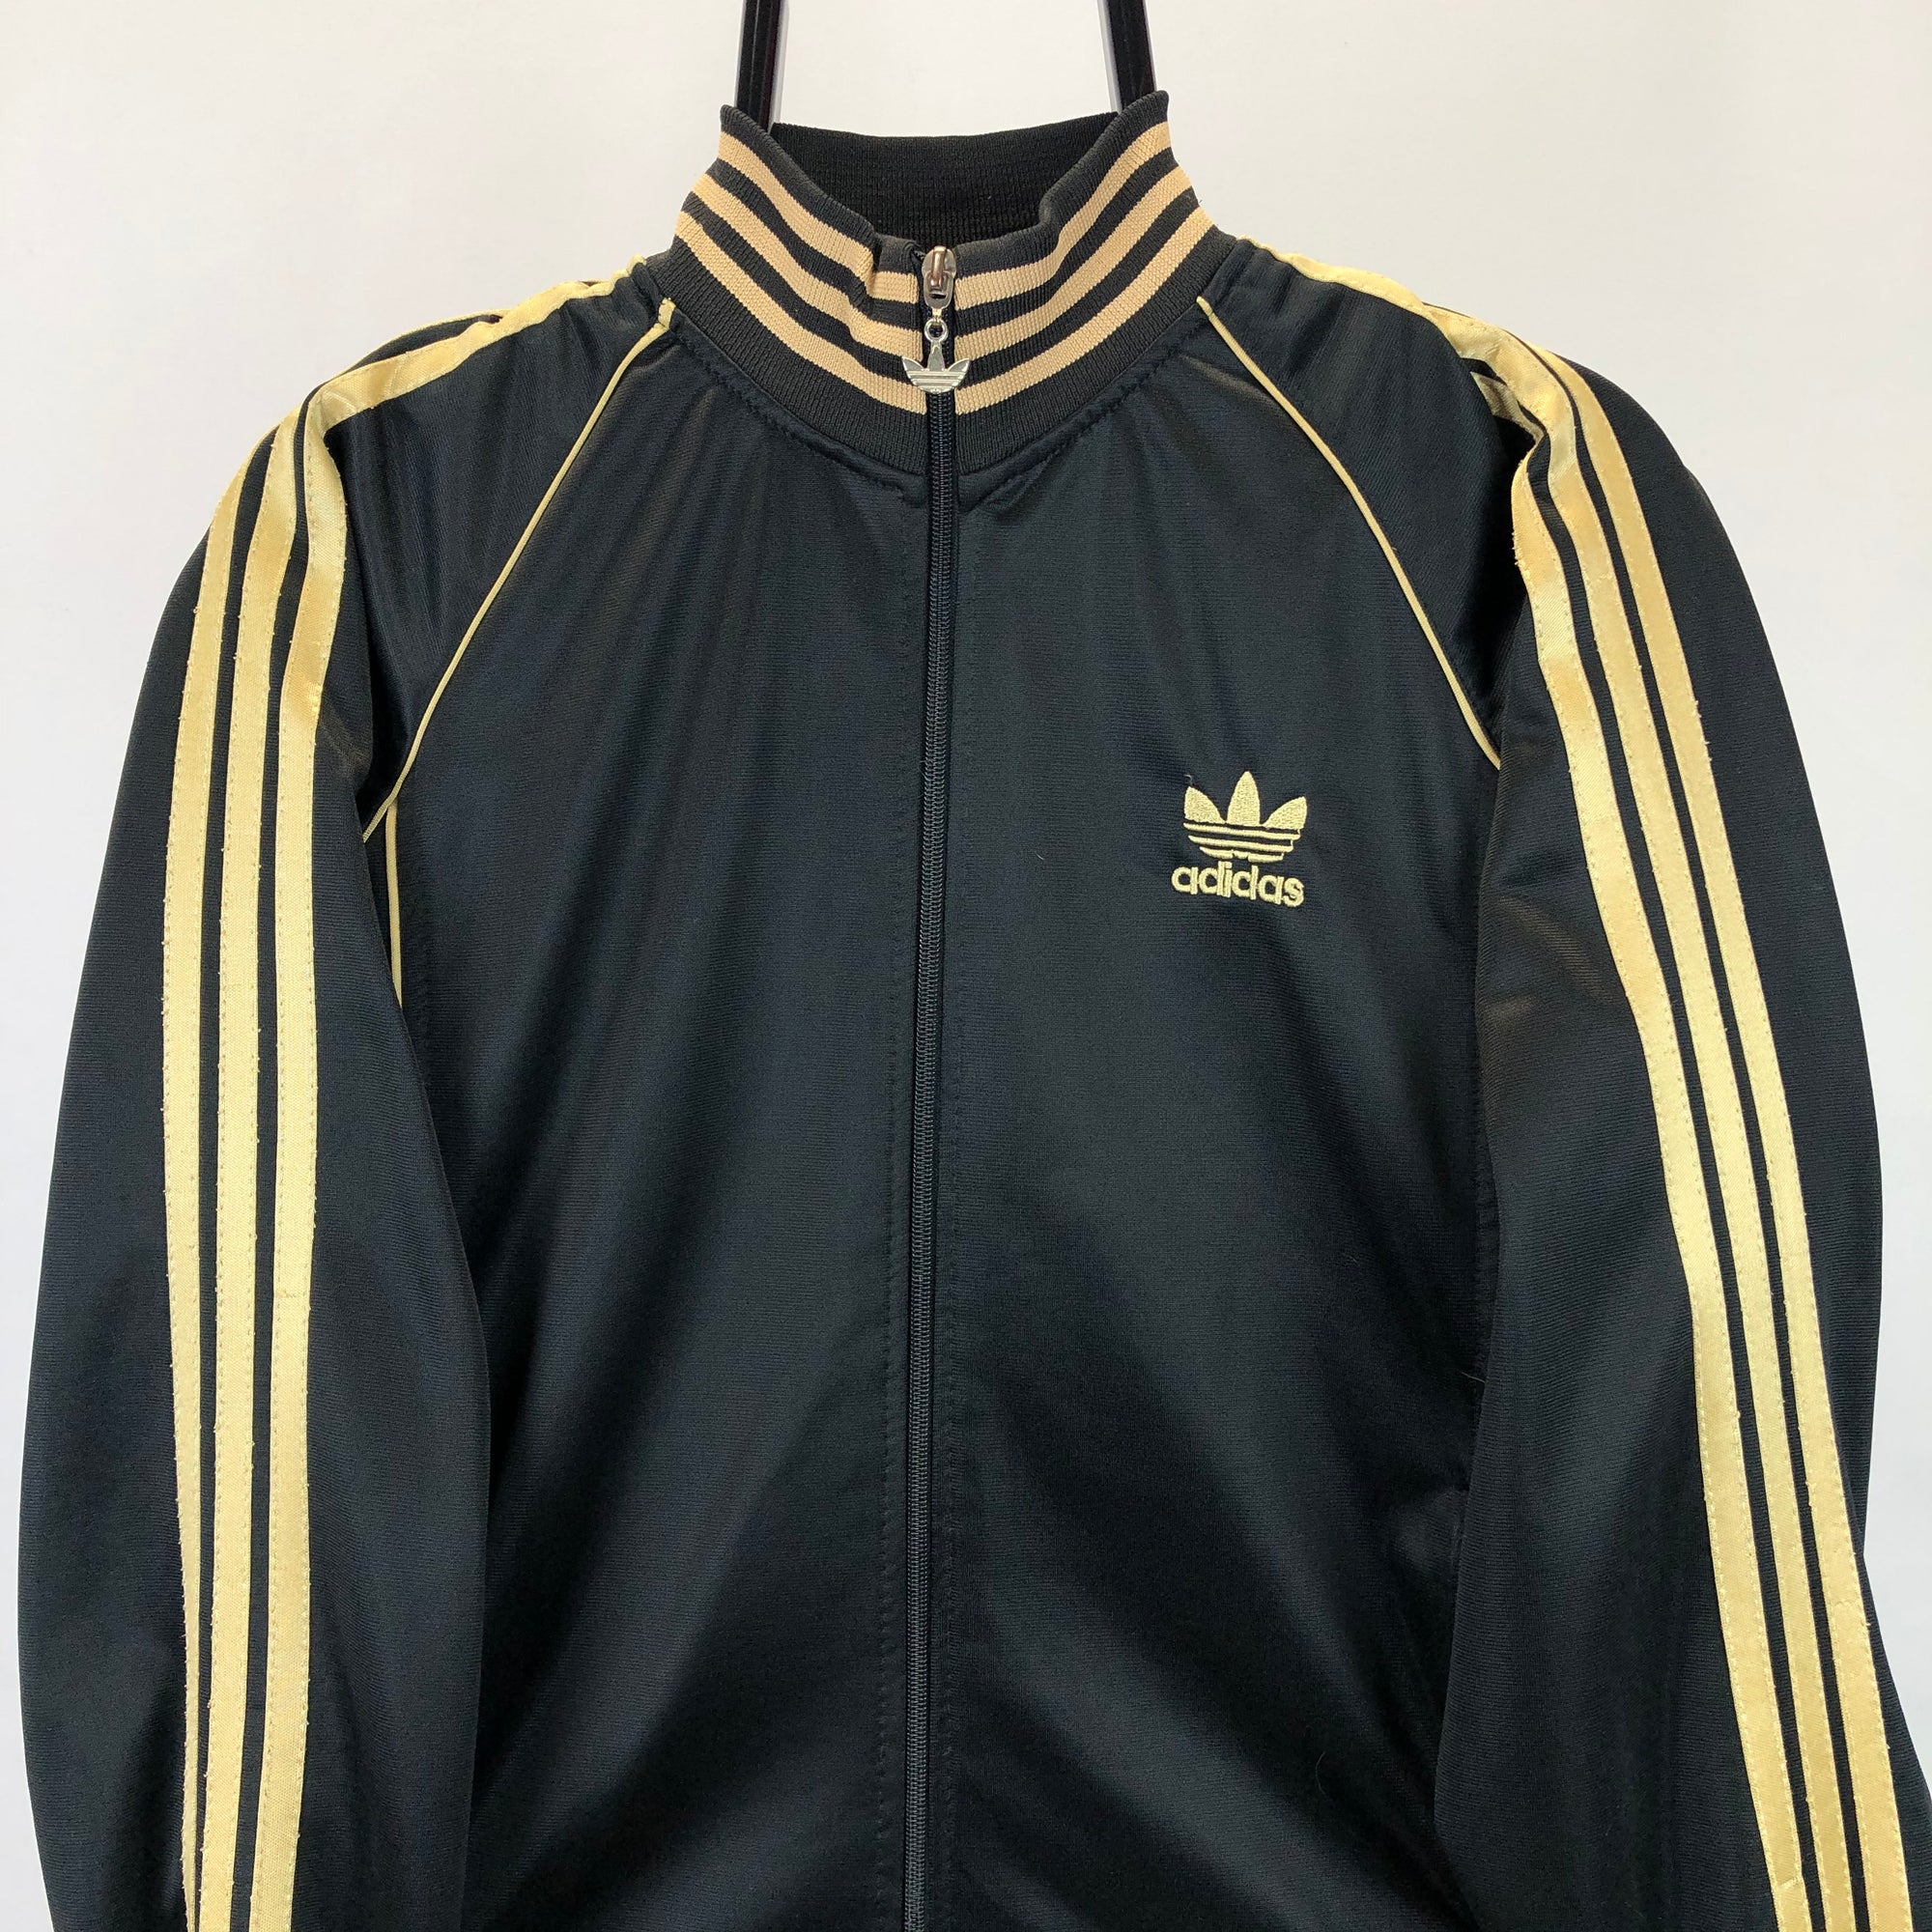 Vintage 90s Adidas Track Jacket in Black/Gold - Men's XS/Women's Small